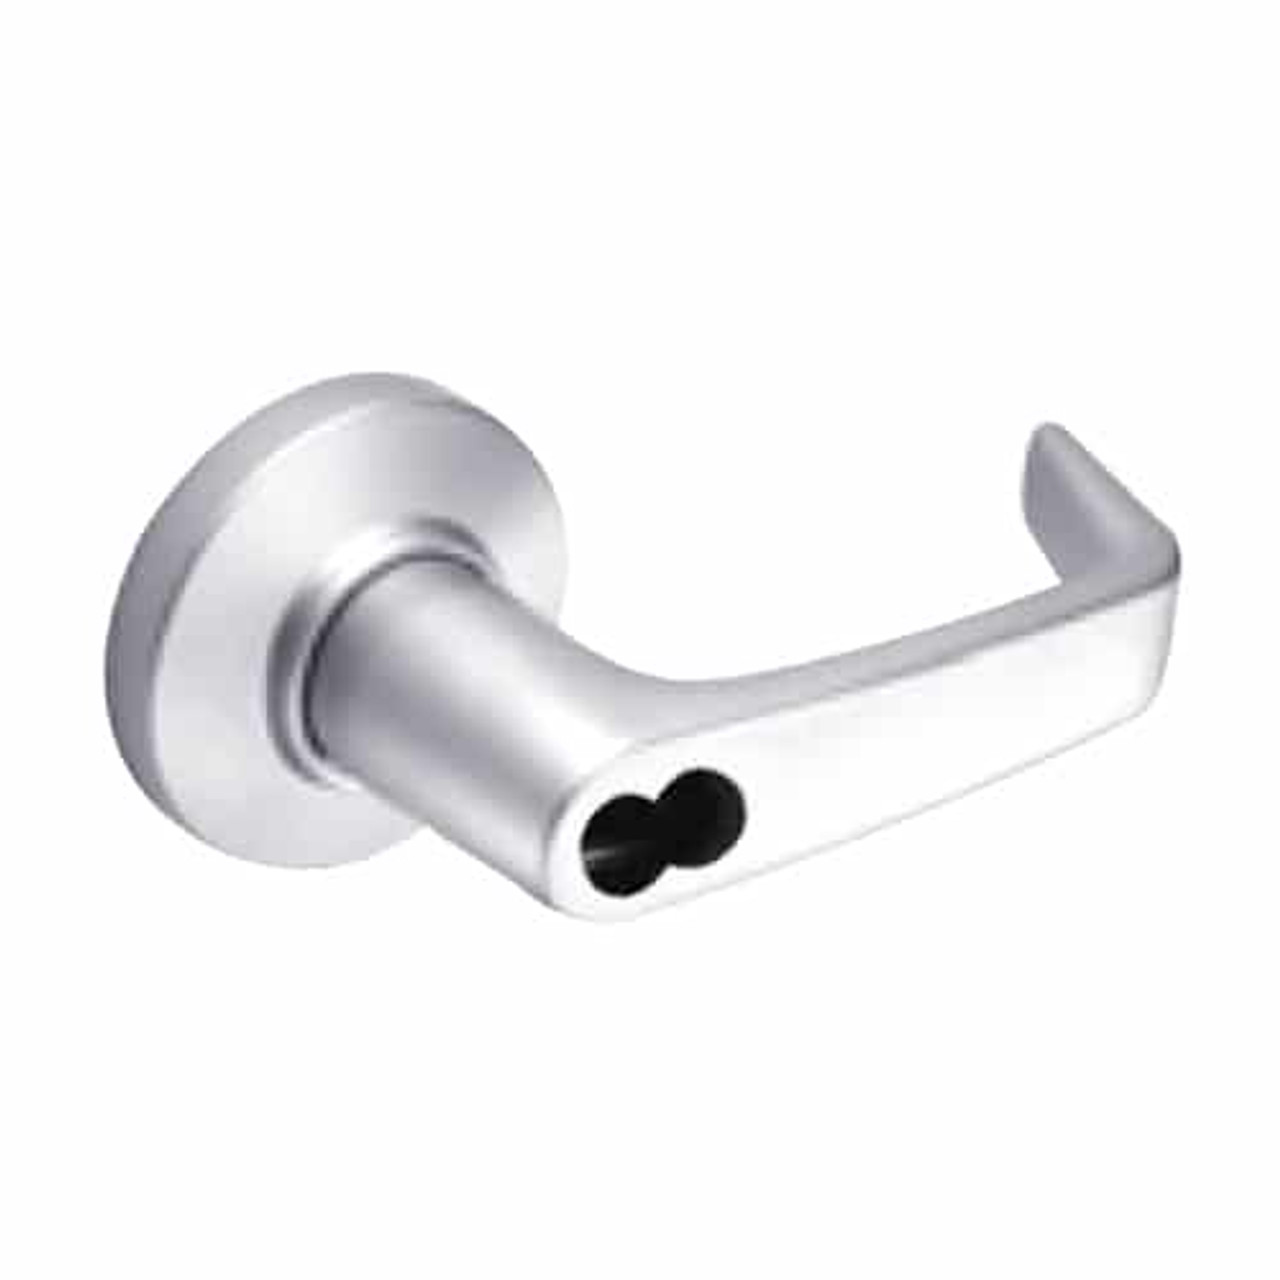 9K37W15CSTK625 Best 9K Series Institutional Cylindrical Lever Locks with Contour Angle with Return Lever Design Accept 7 Pin Best Core in Bright Chrome